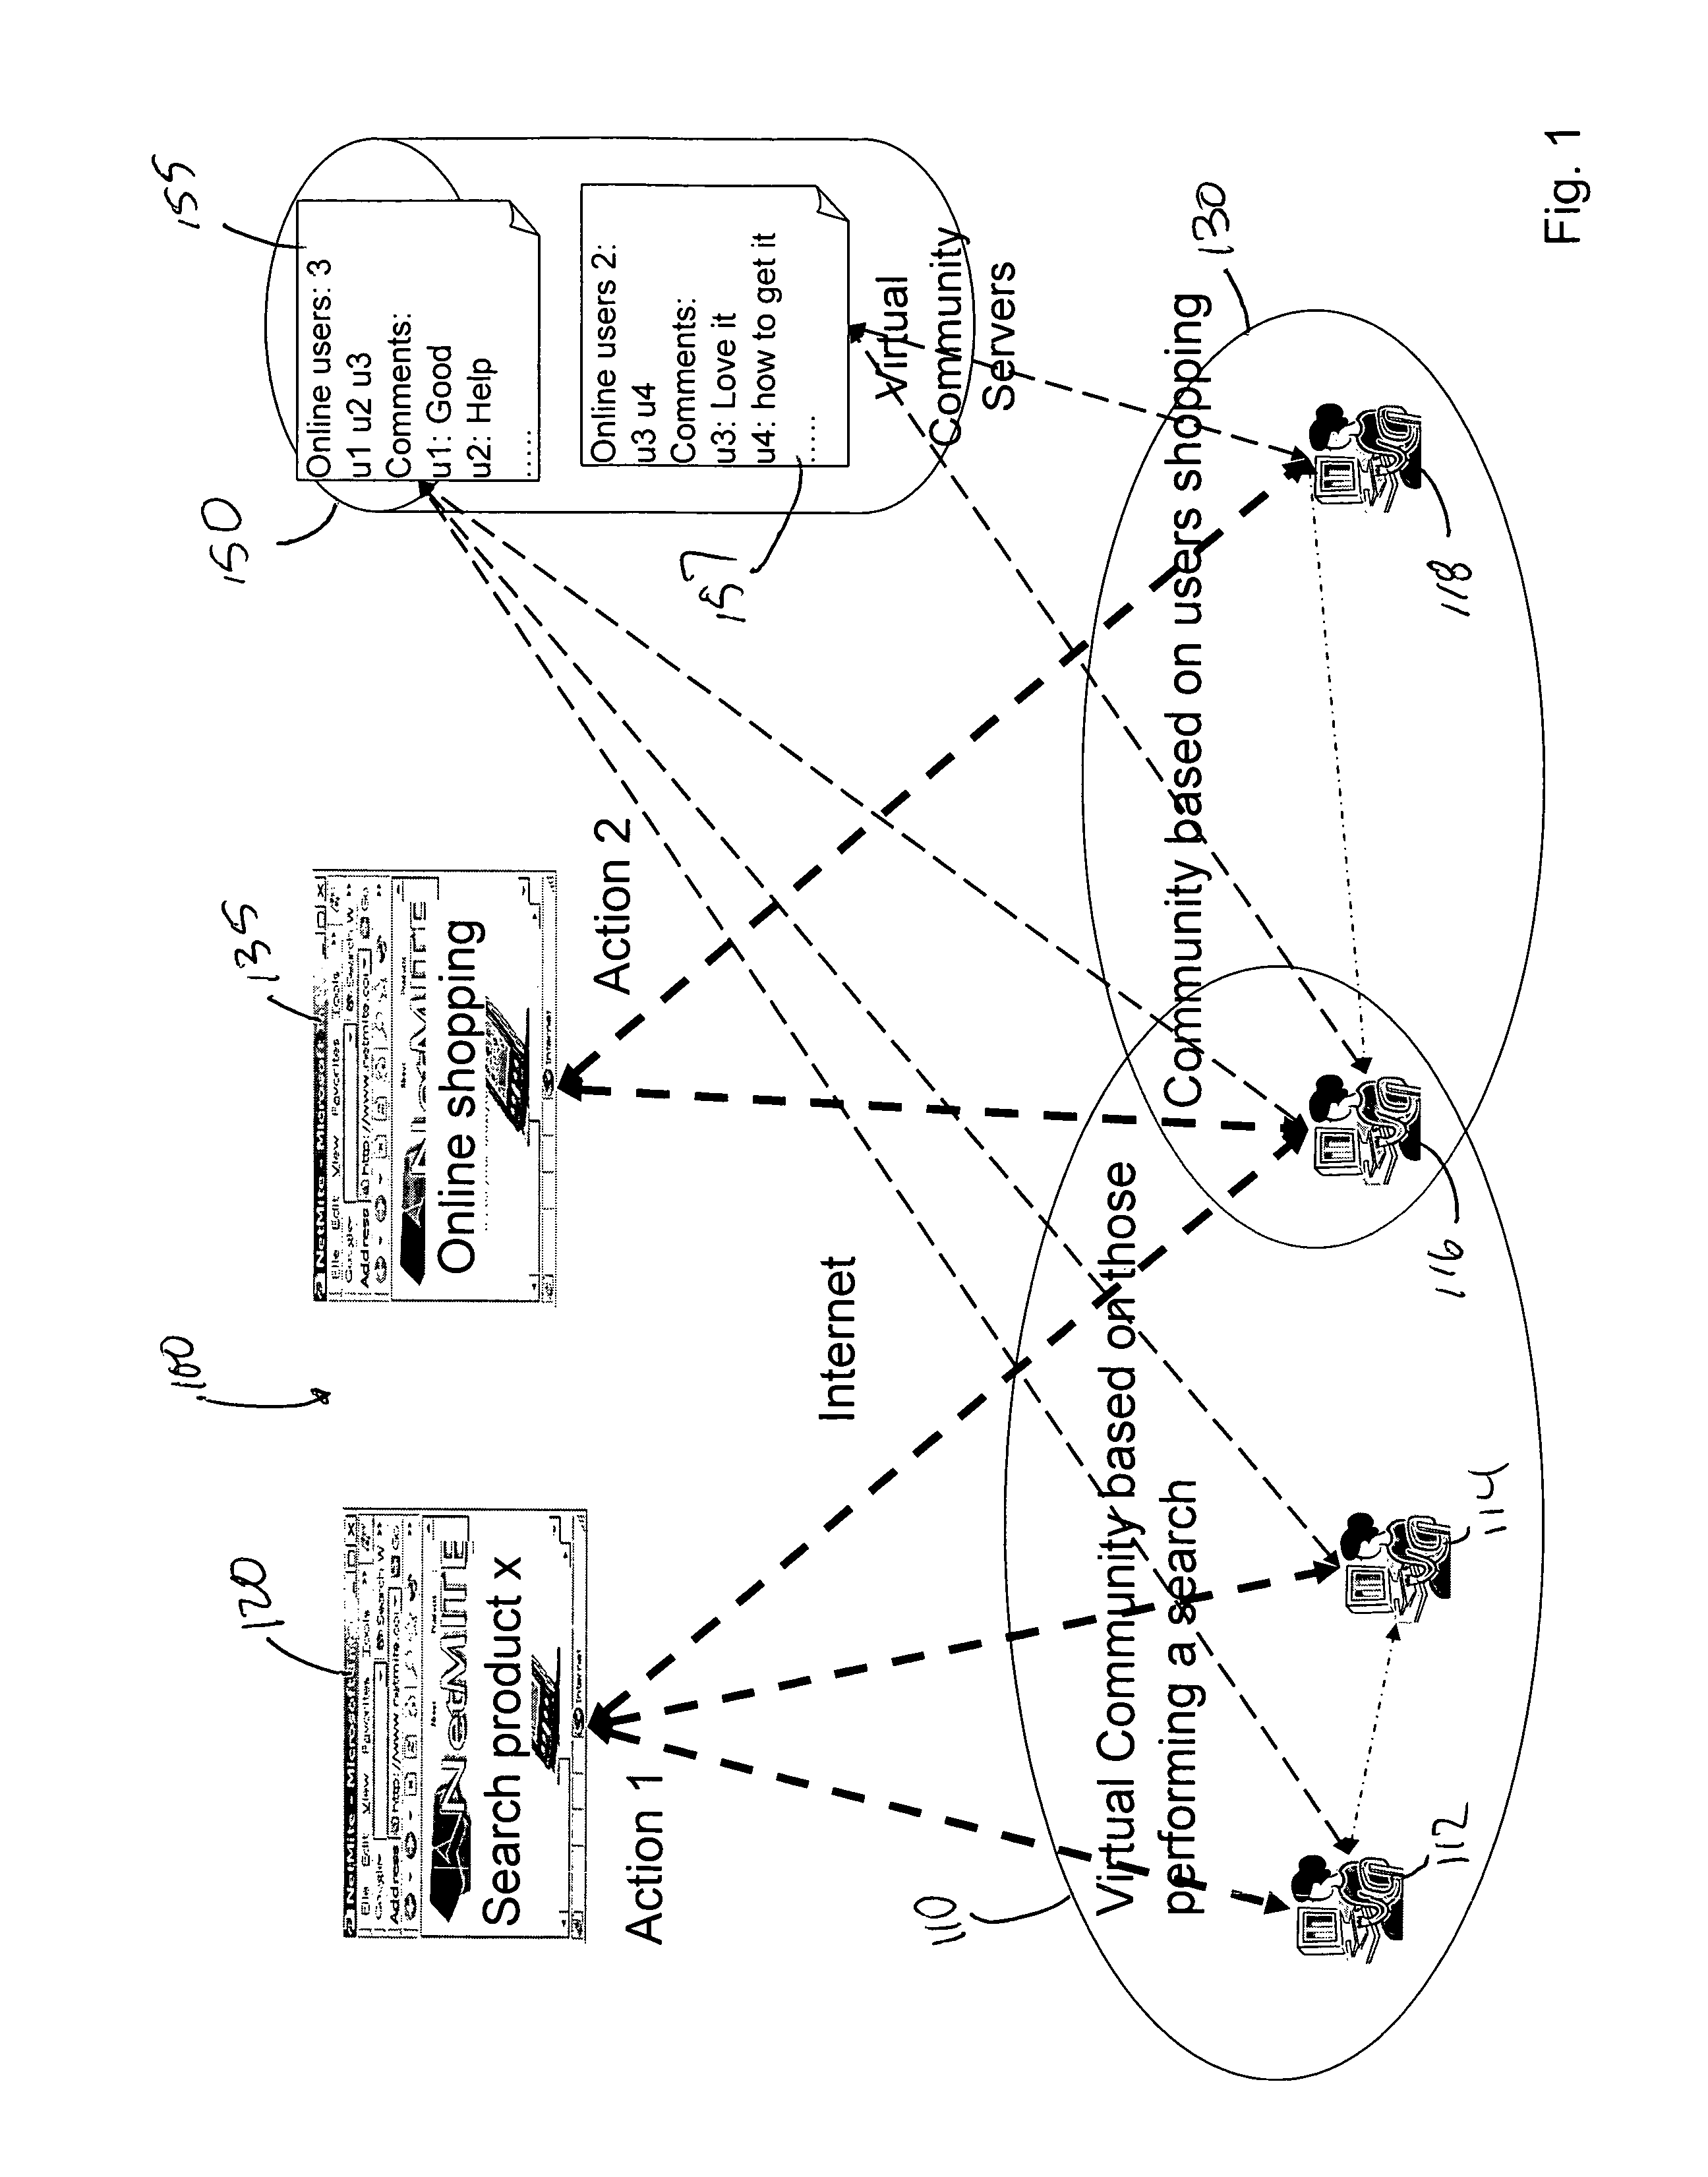 System and method of forming action based virtual communities and related search mechanisms